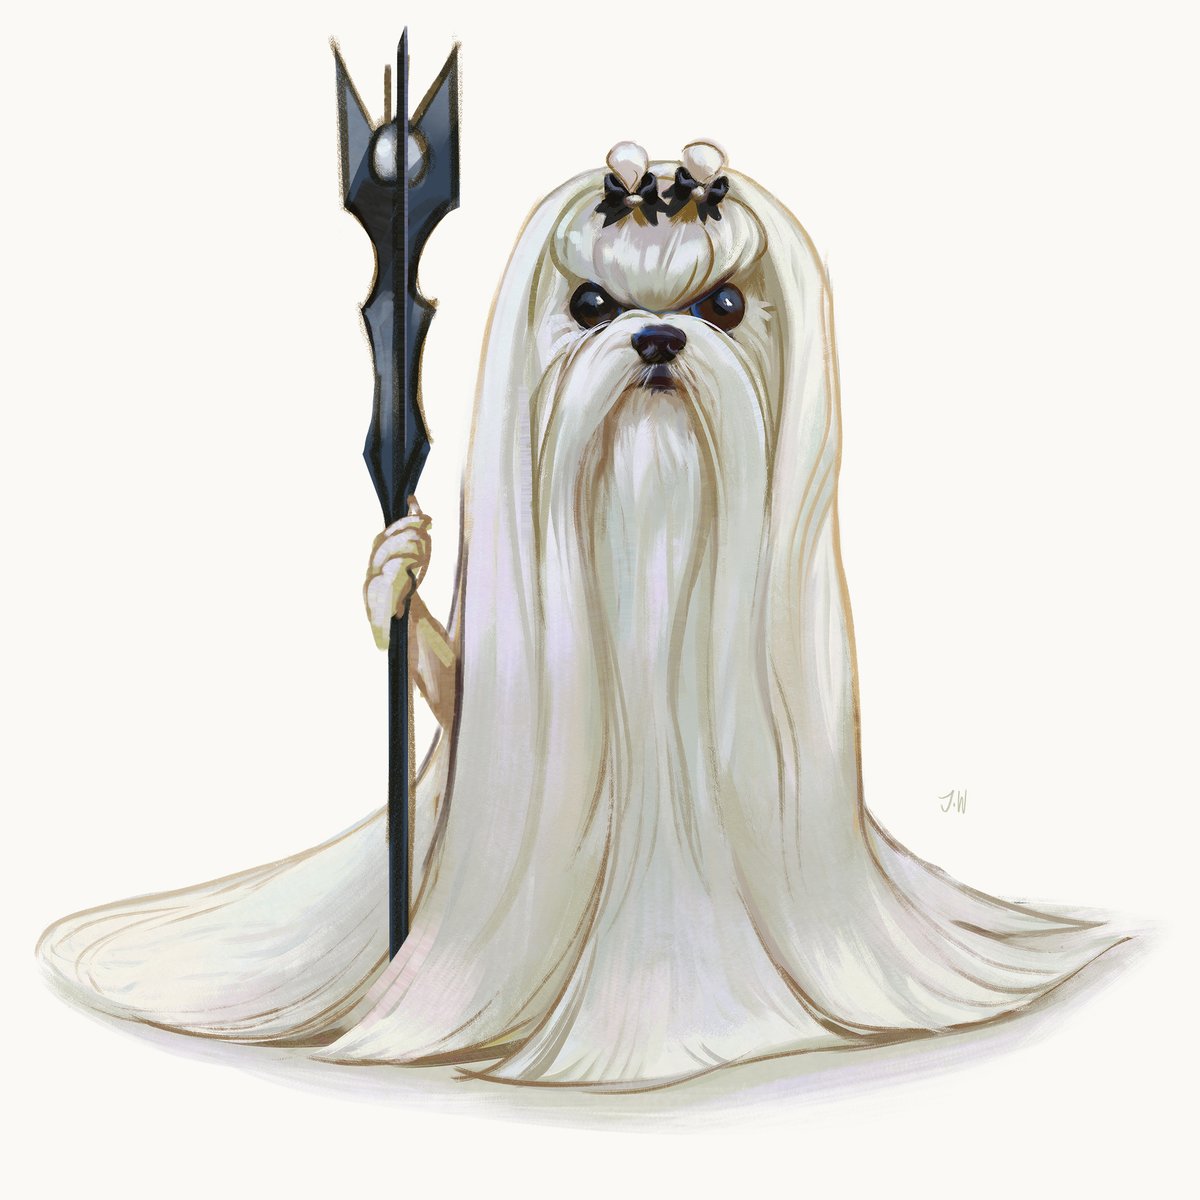 Got some comments that my Maltese dog looked like Saruman and I can't unsee it so here's a paintover